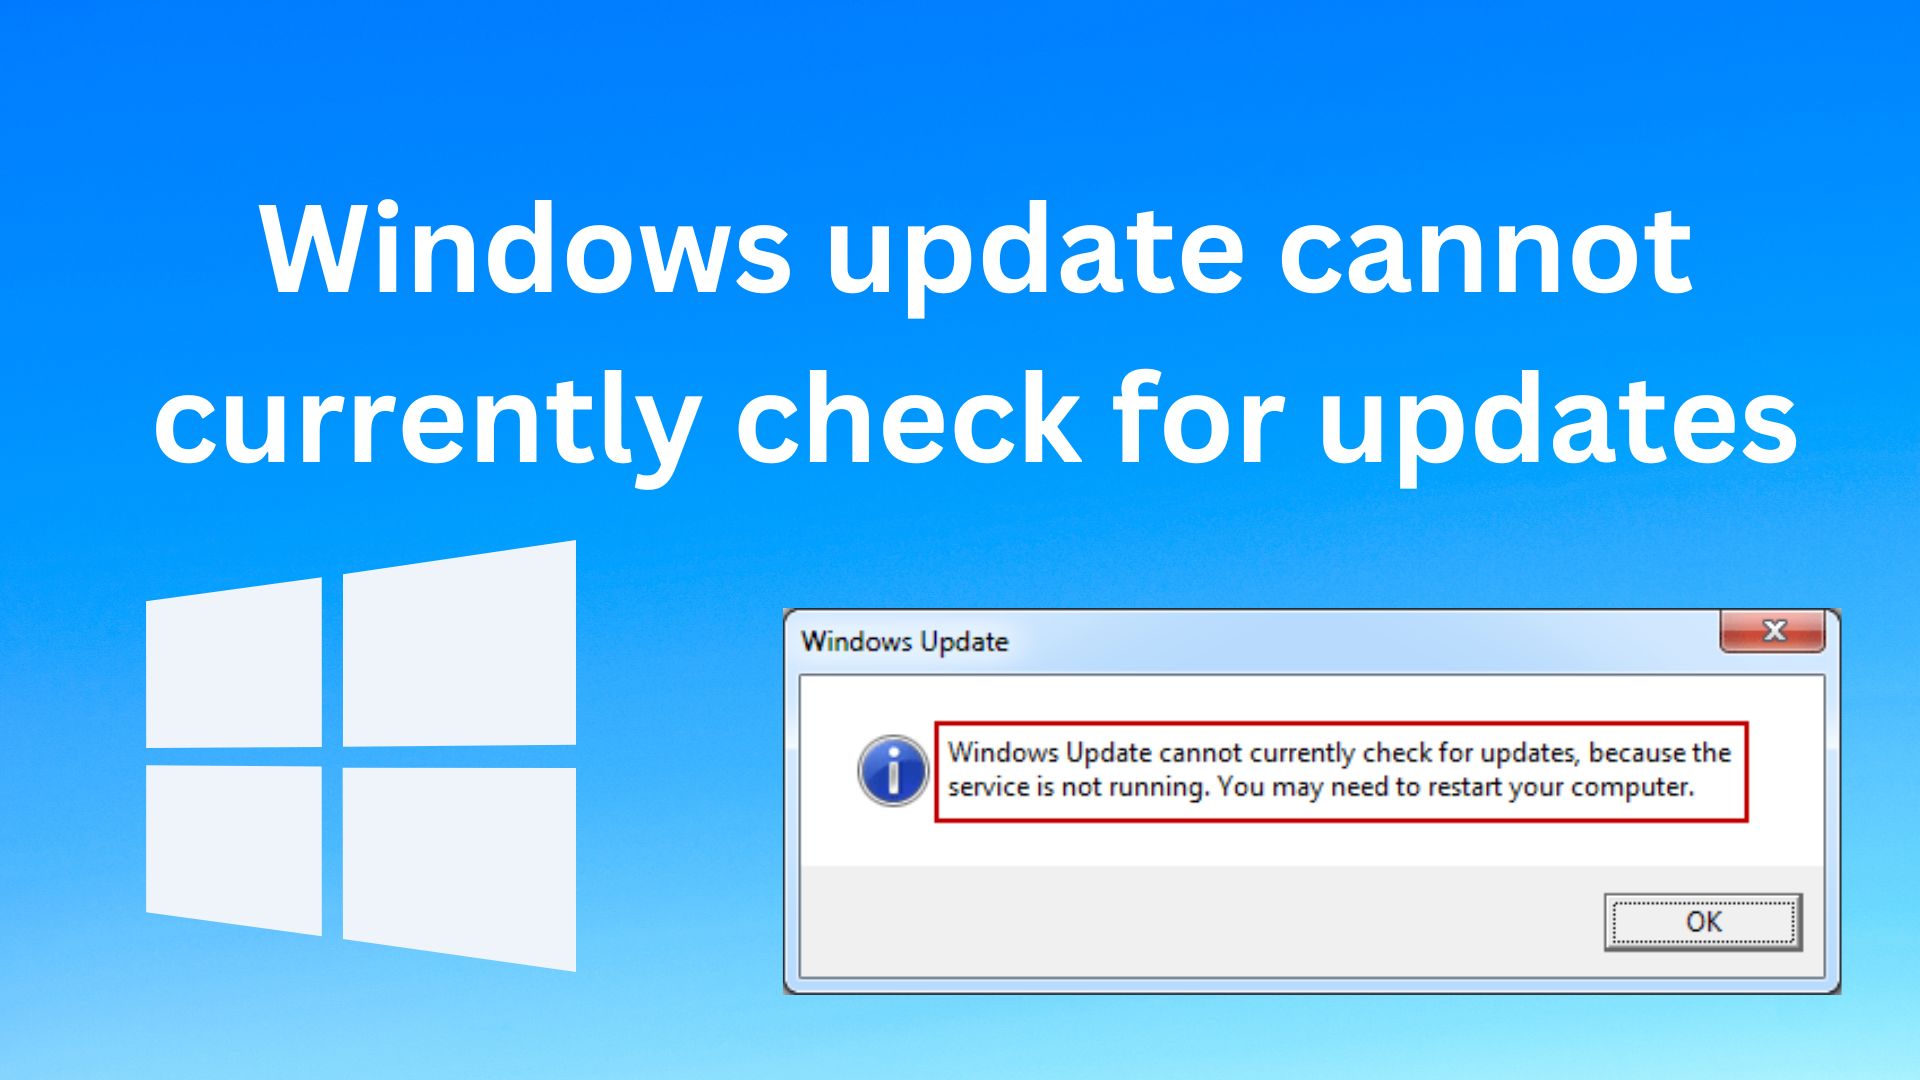 windows update cannot currently check for updates because the service is not running